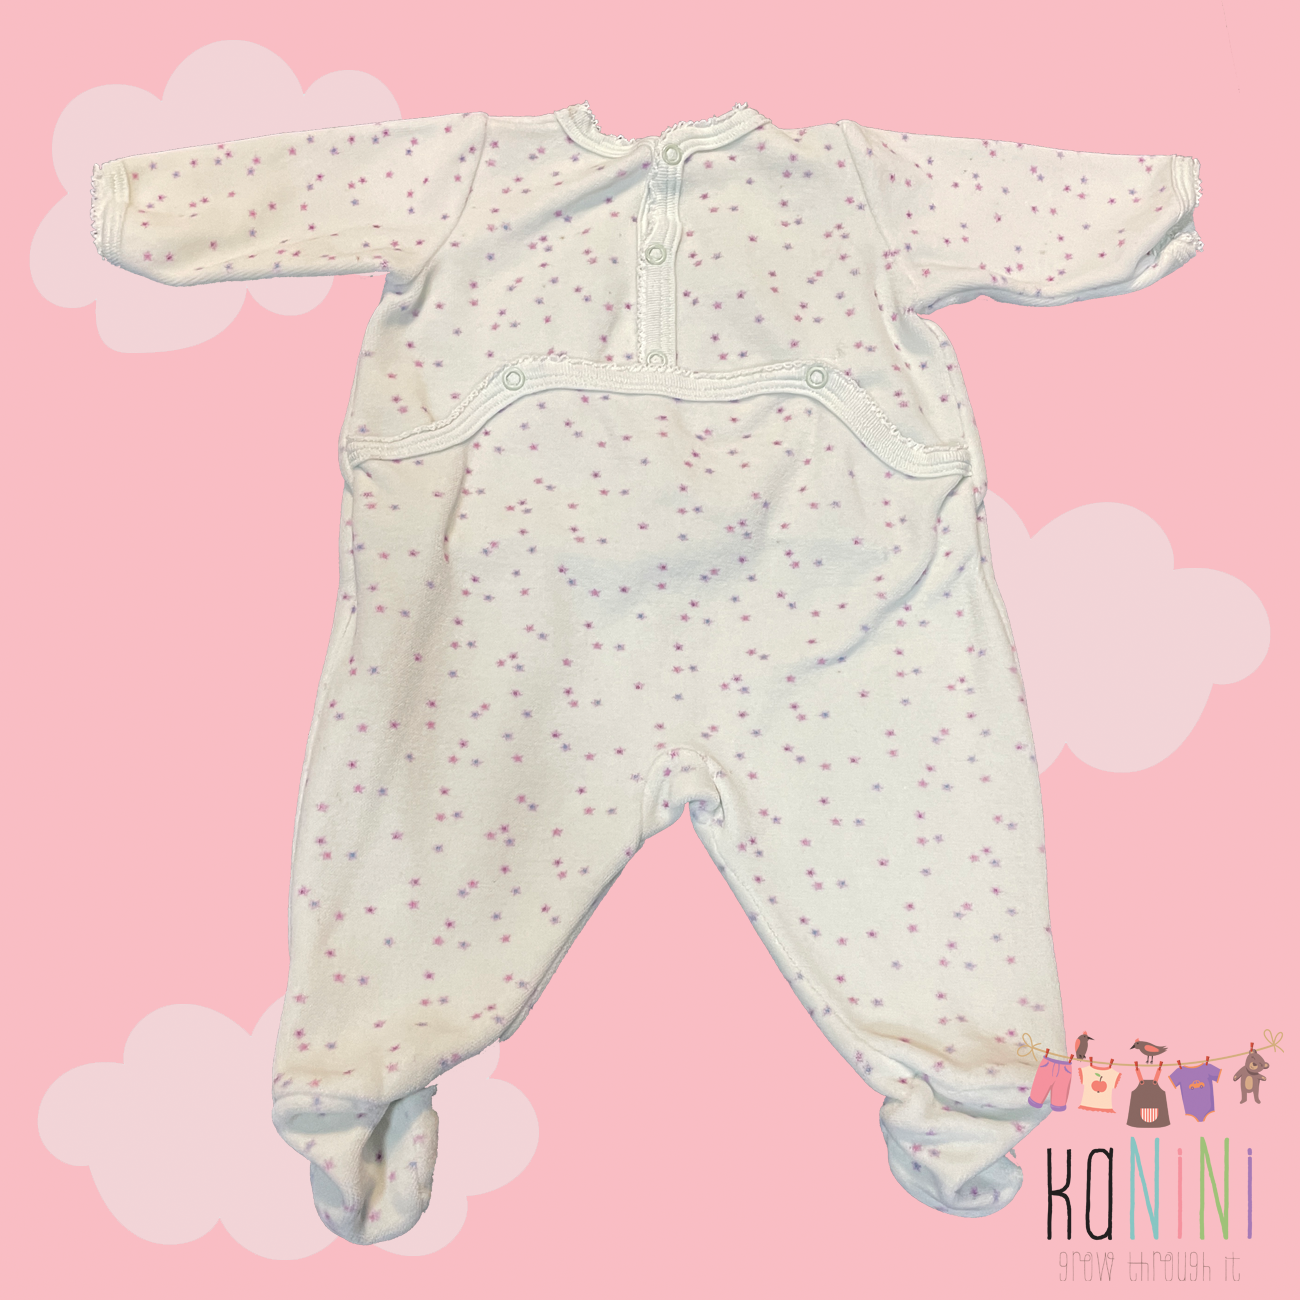 Featured image for “Petit Bateau 1 Month Girls Winter Babygrow”